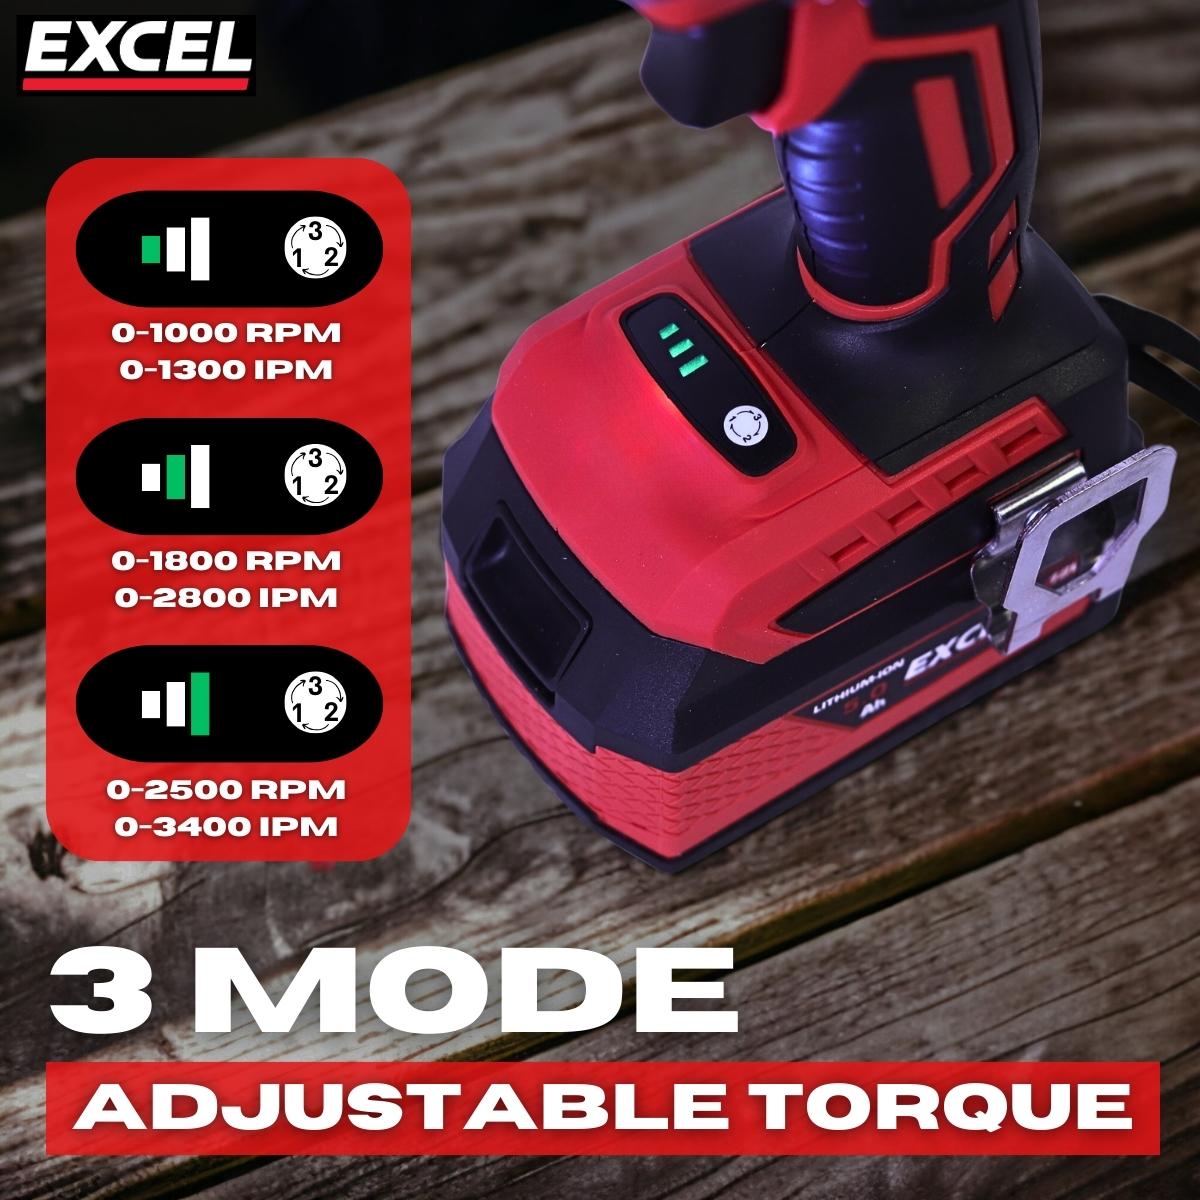 Excel 18V Cordless Brushless 1/2'' Impact Wrench with 1 x 5.0Ah Battery Charger & Bag